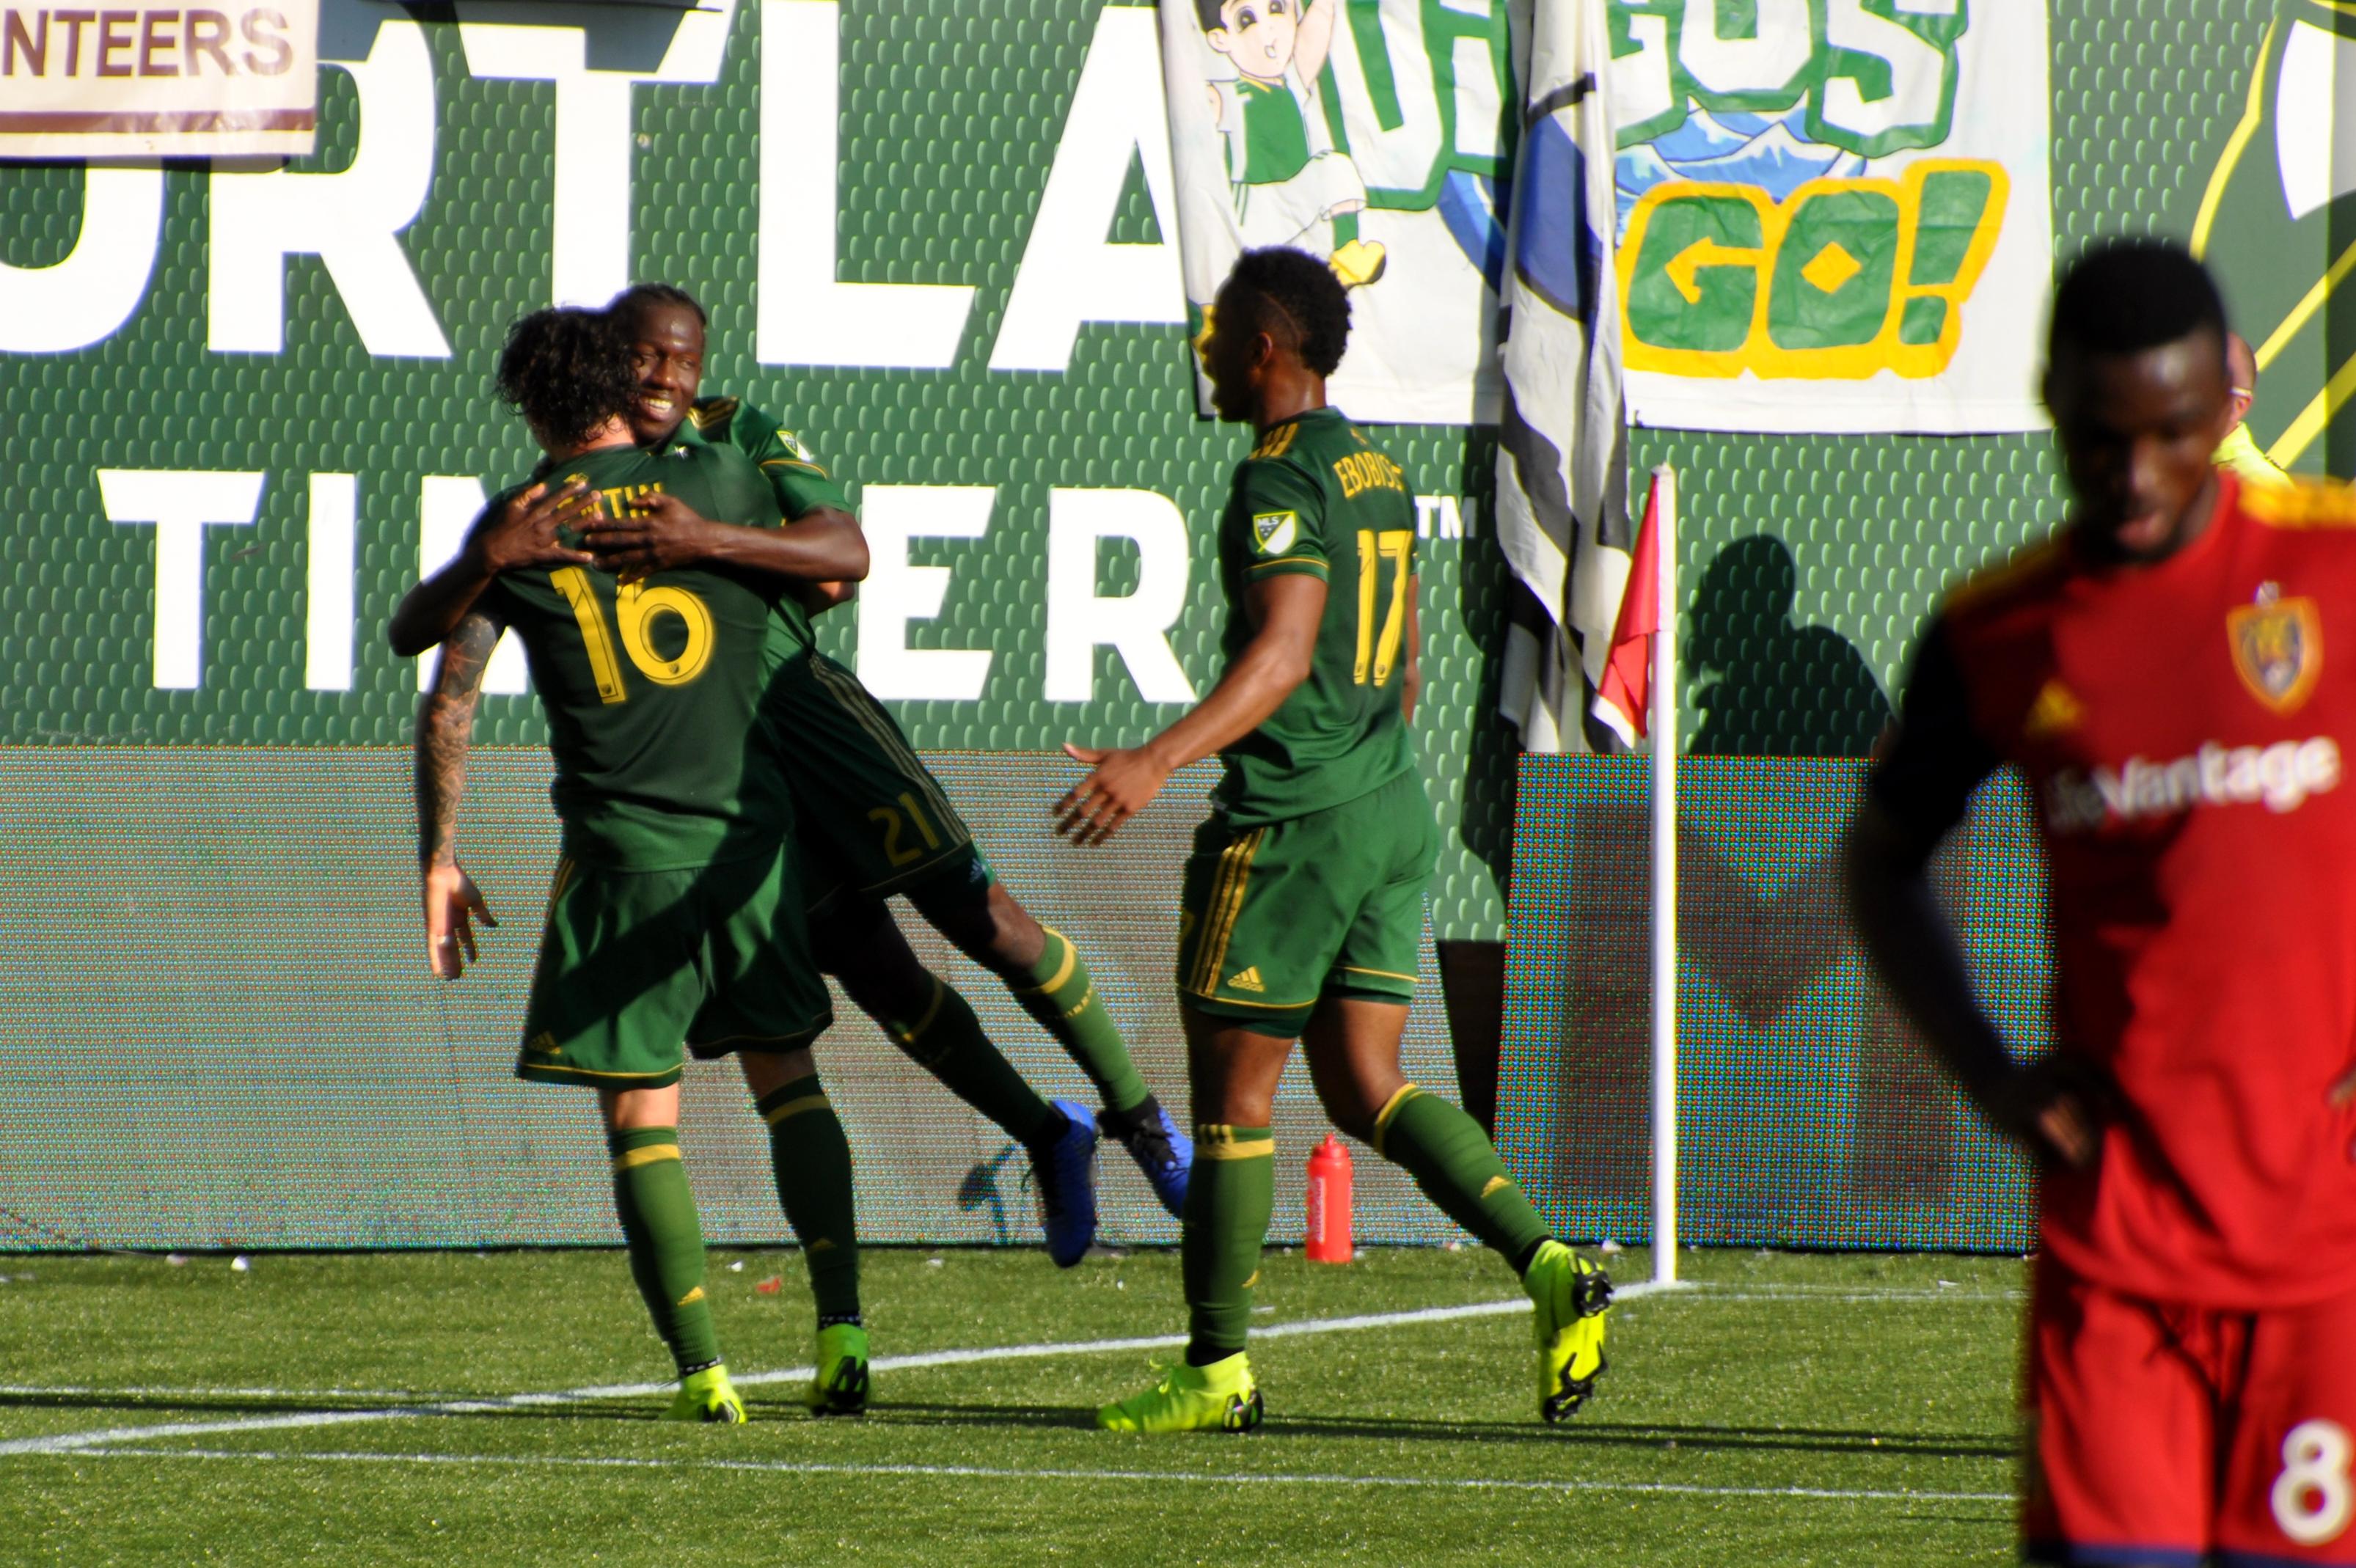 Timbers clinch playoff berth with 3-0 shutout of Real Salt Lake